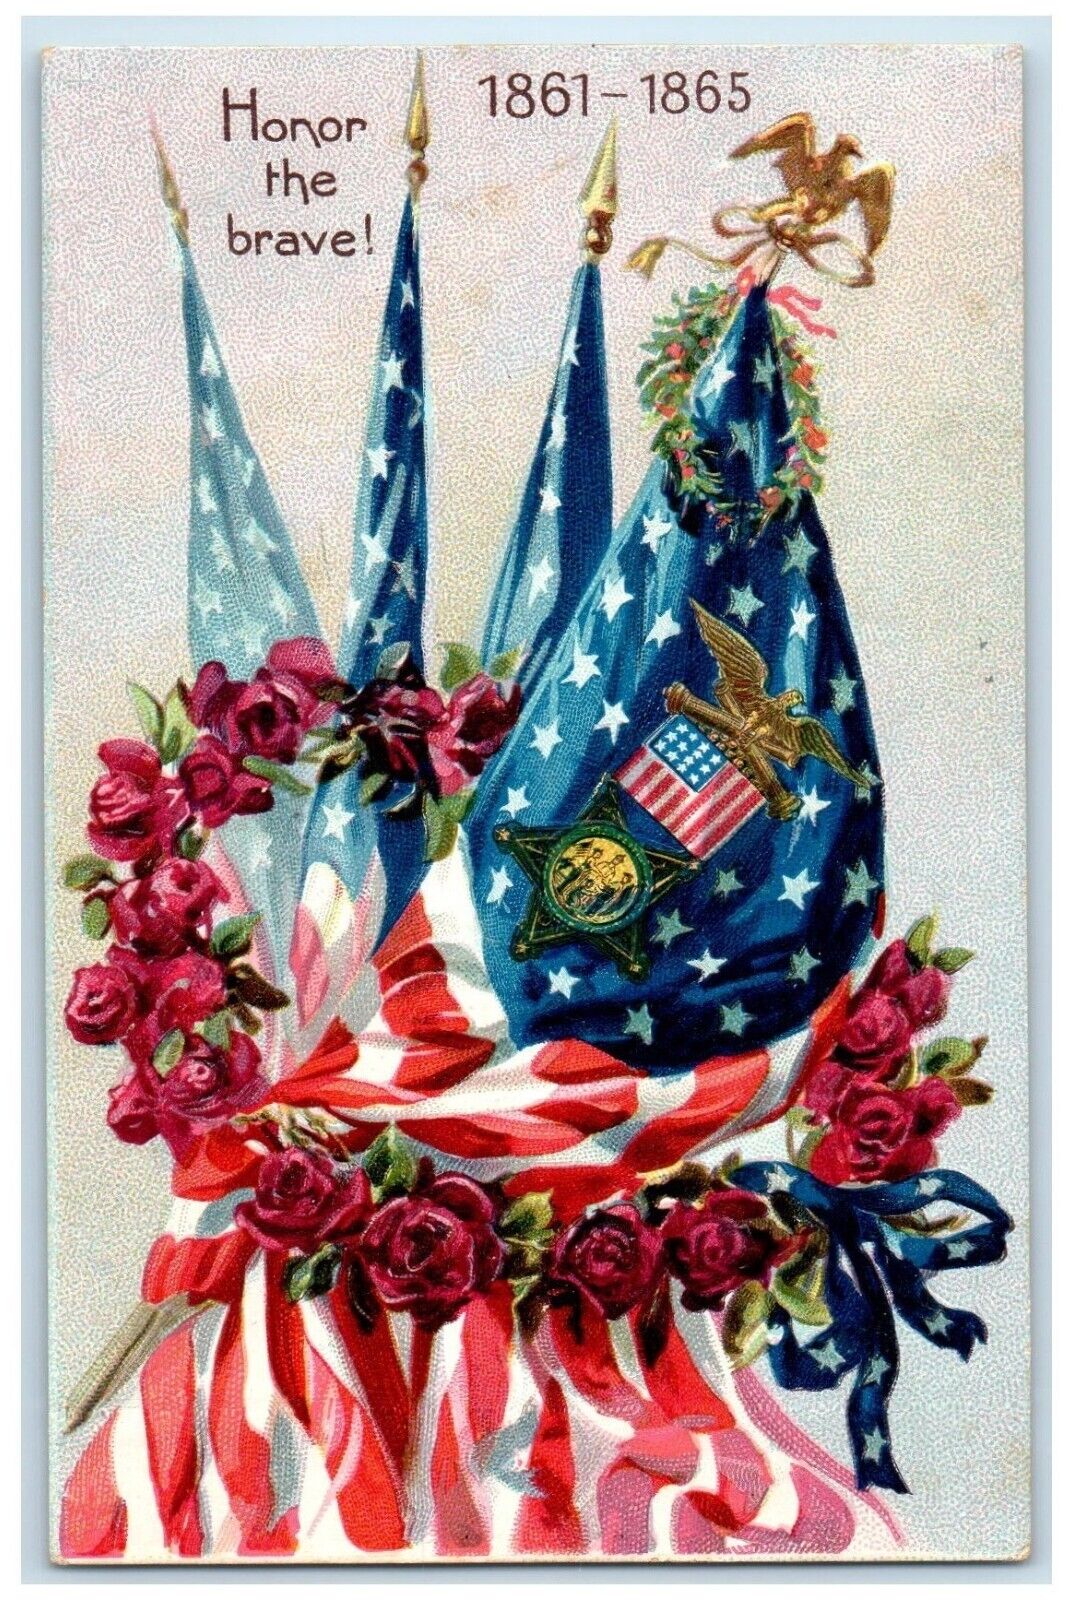 c1910's Decoration Day Patriotic Honor The Brave Tuck's Posted Antique Postcard